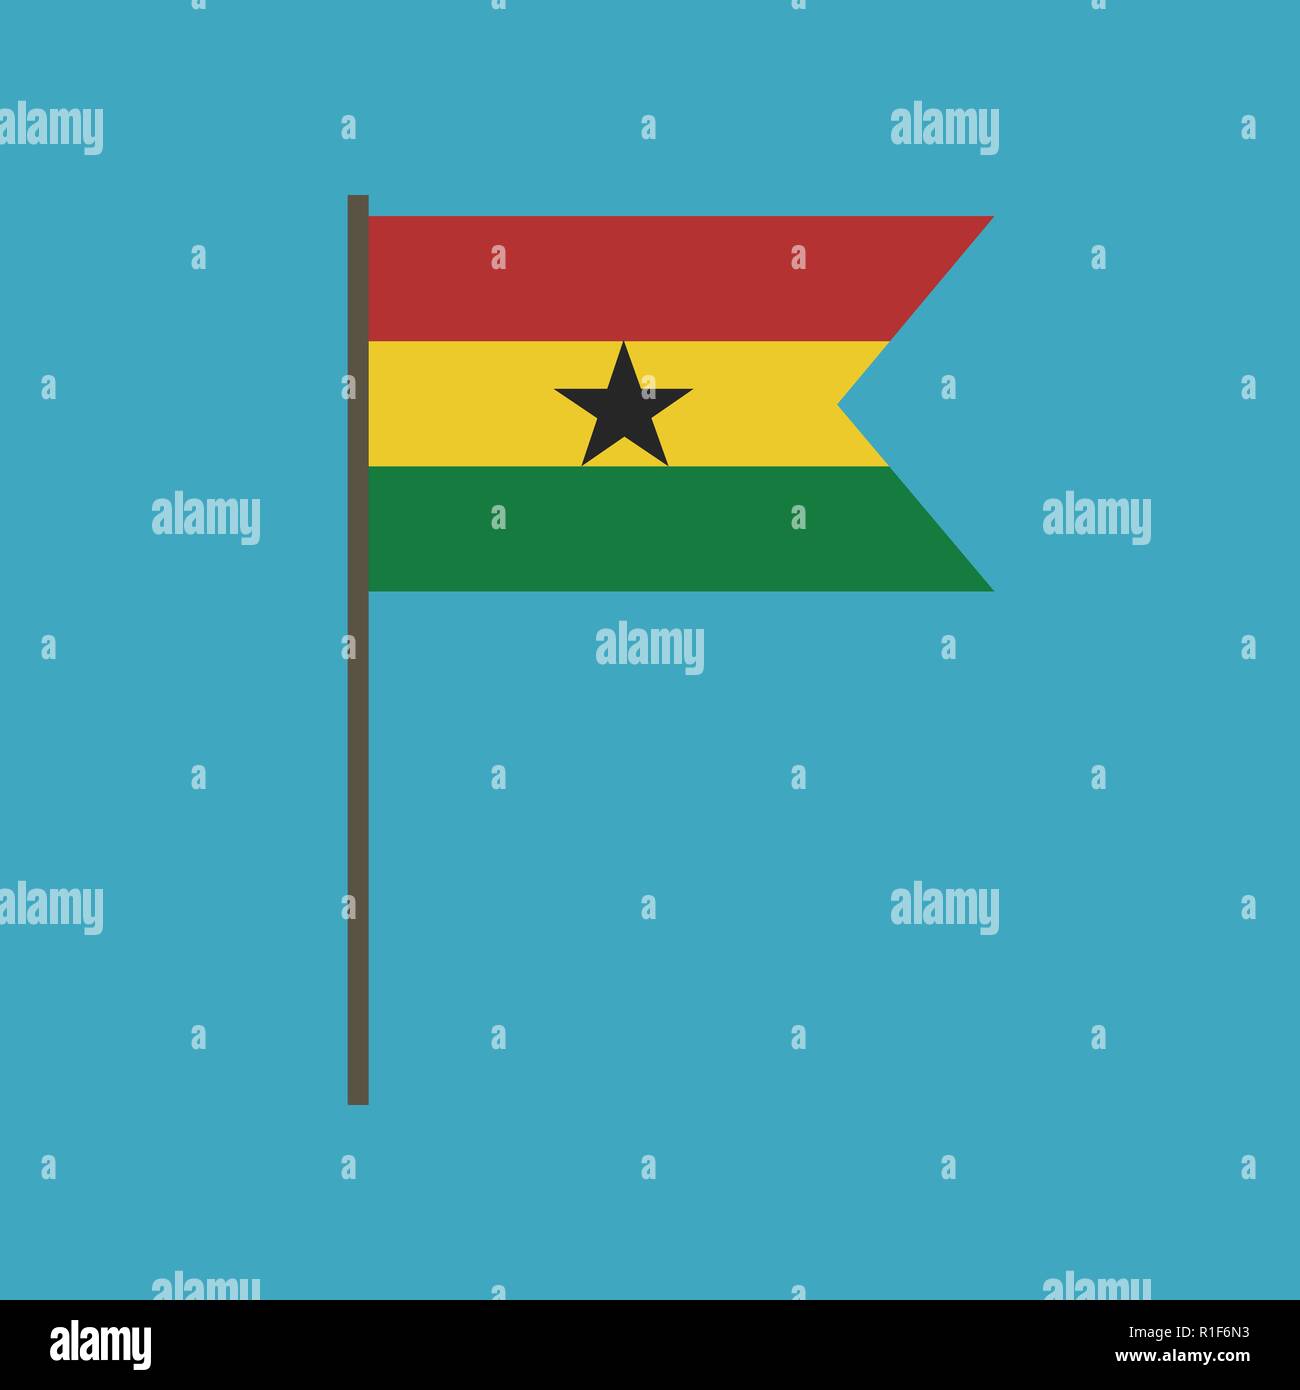 Ghana flag icon in flat design. Independence day or National day holiday concept. Stock Vector